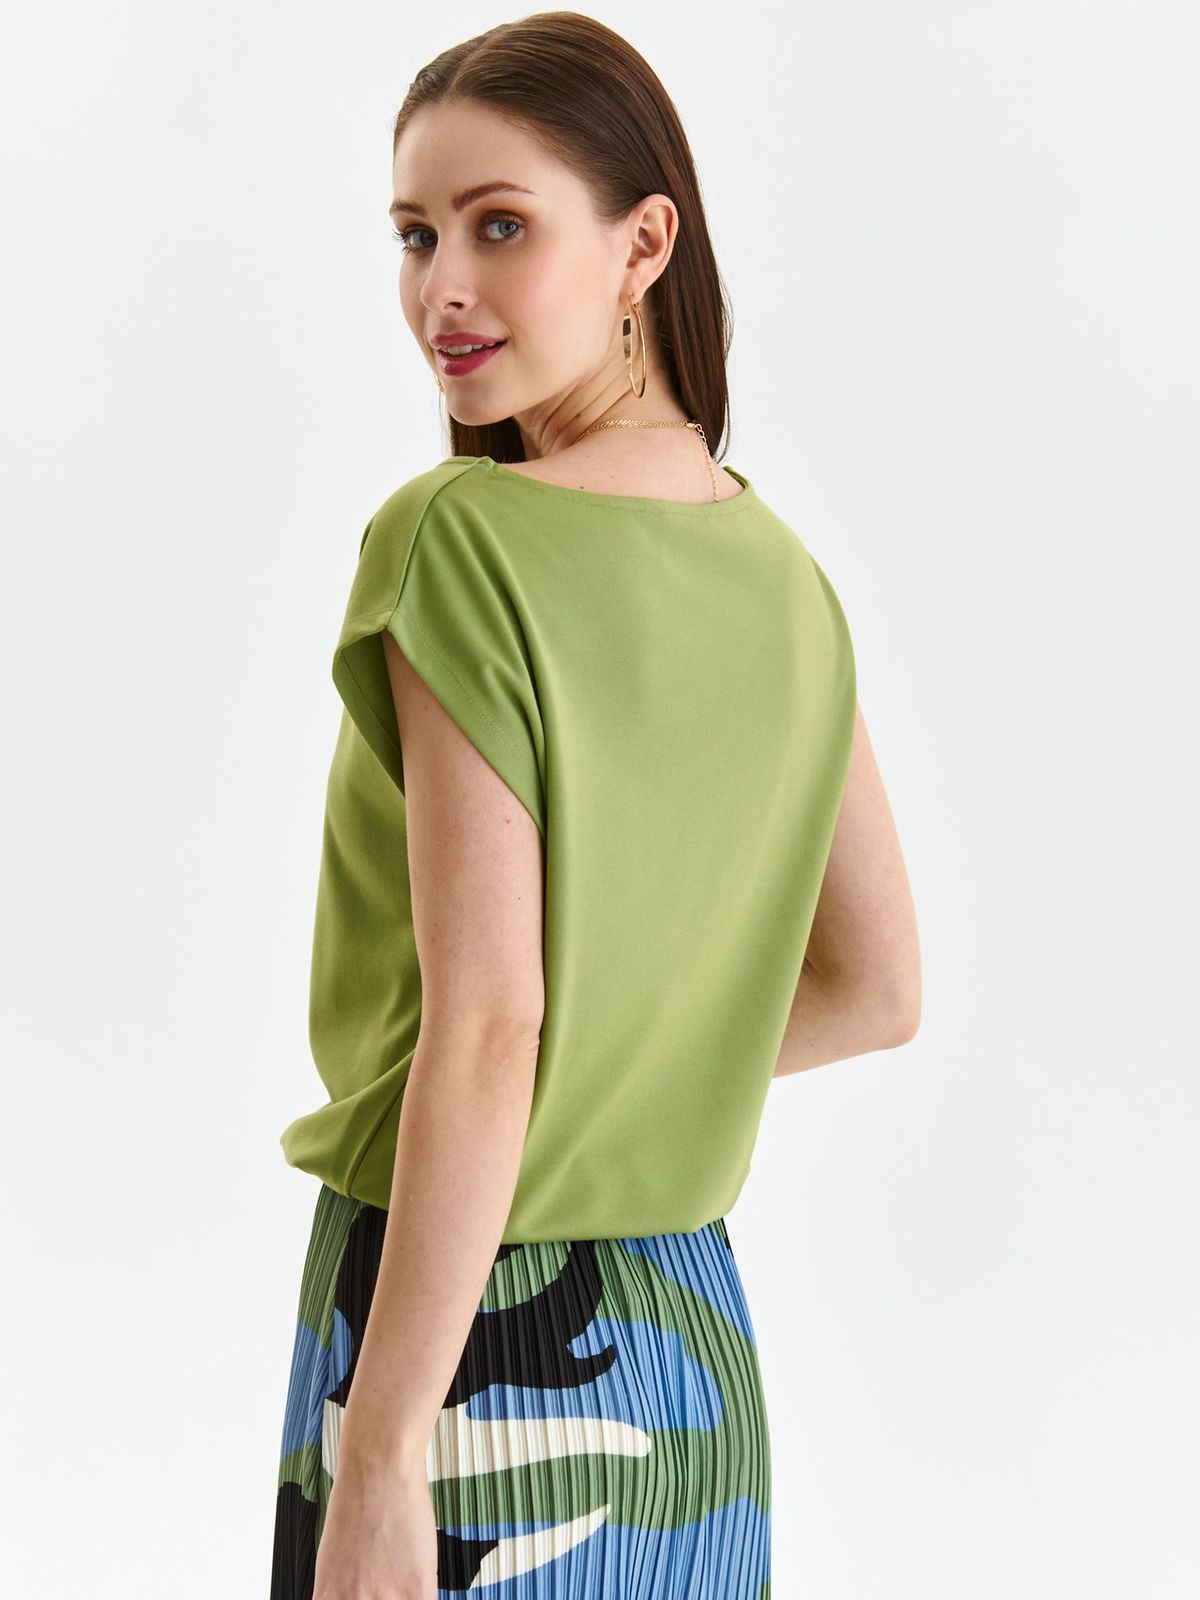 Green women`s blouse thin fabric loose fit with elastic waist